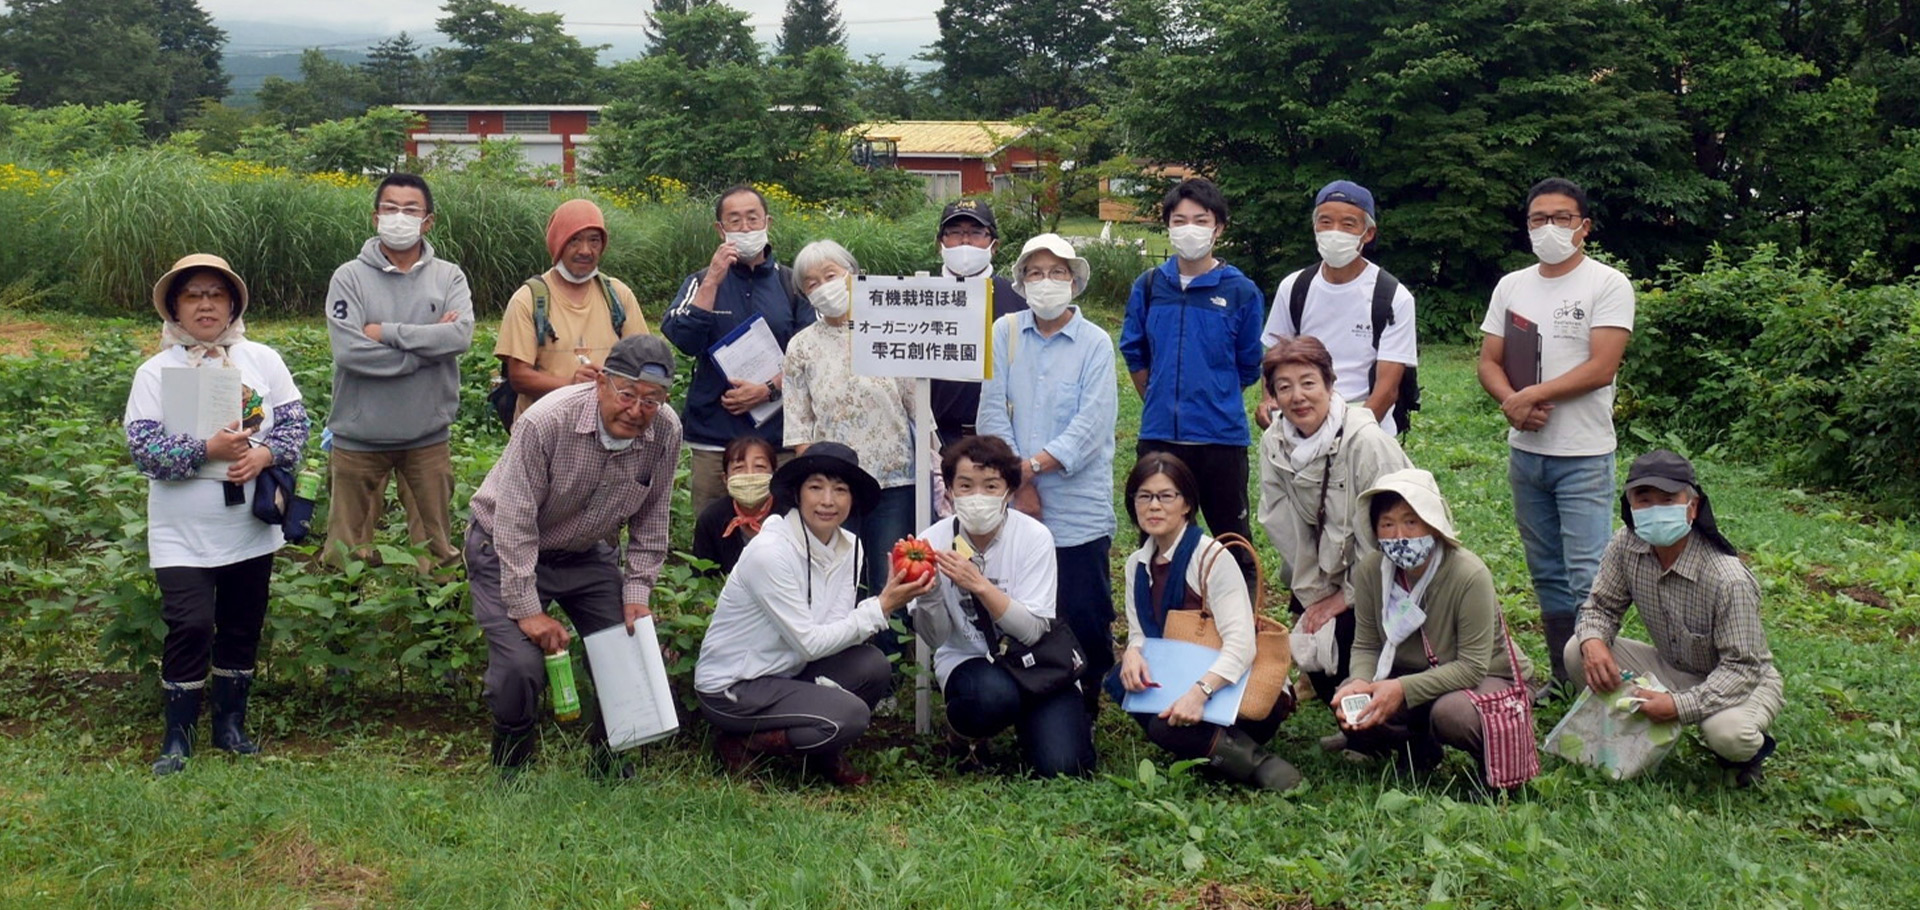 How PGS Have Been Contributing to the Local Communities in Japan